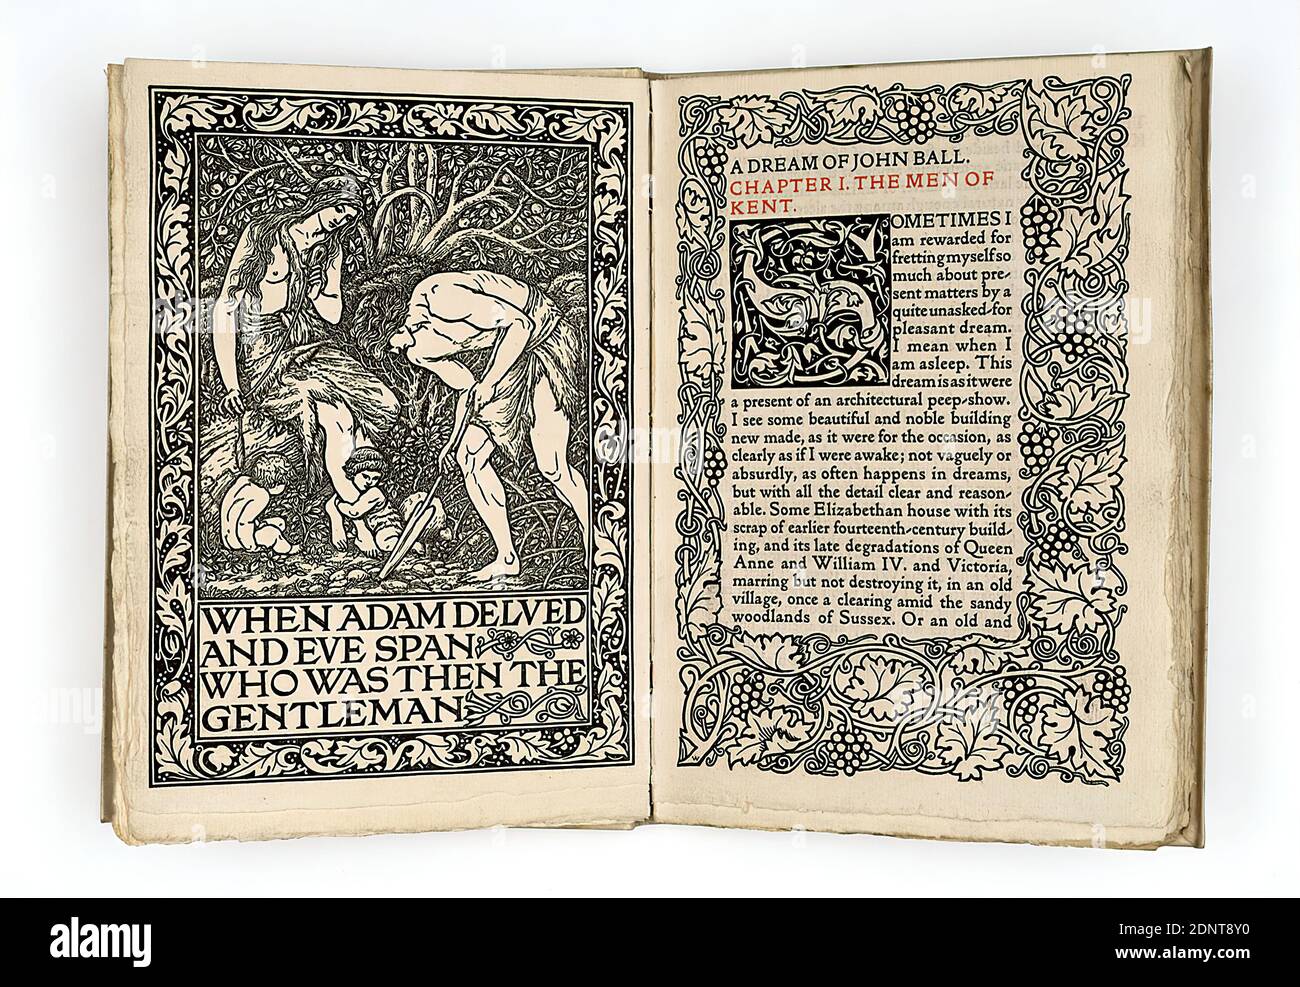 Kelmscott Press, Edward Burne-Jones, William Morris: A Dream of John Ball, paper, parchment, letterpress, wood engraving, Total: Height: 20 cm; Width: 14.5 cm, Printmaking, Prints, Adam and Eve at work, Childhood of Cain and Abel, Art Nouveau, A Dream of John Ball, this socially critical narrative by William Morris, which takes its motif from the English peasant revolts of the 14th century. It was published in 1892 by the Kelmscott Press as the sixth book of this hand press. The book design was in the hands of William Morris, who designed the floral frame borders and initials. Stock Photo